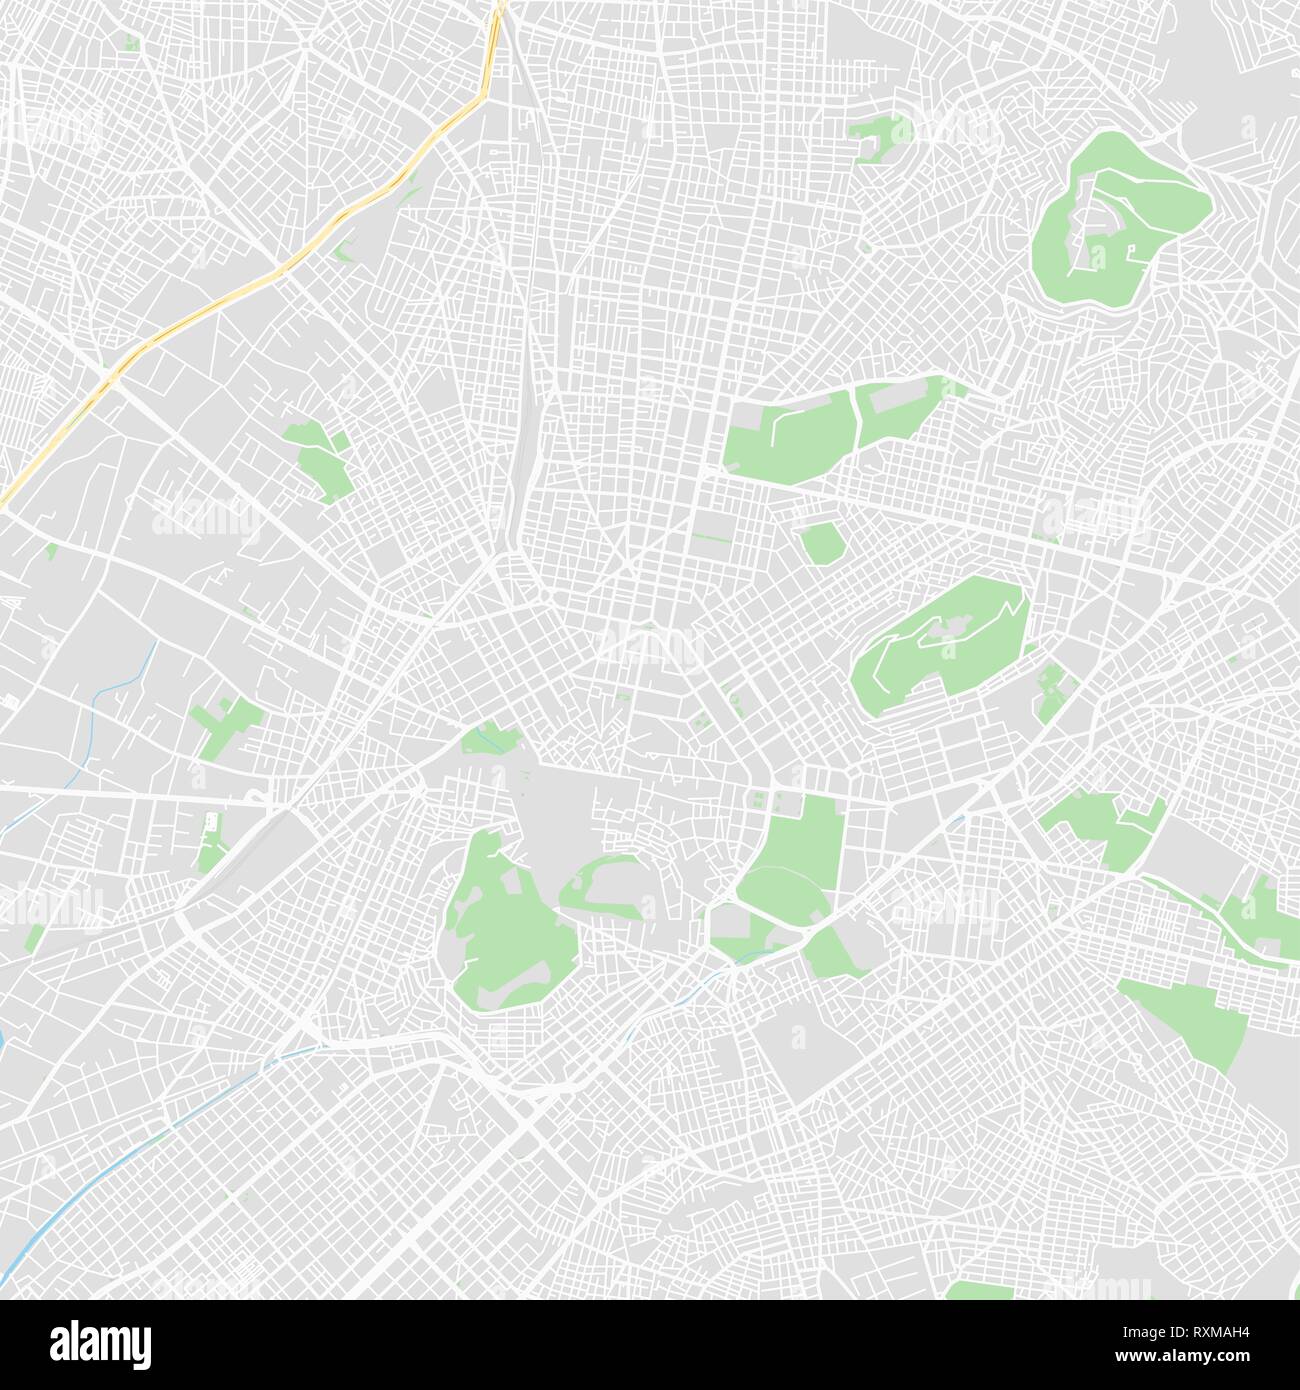 Downtown vector map of Athens, Greece. This printable map of Athens contains lines and classic colored shapes for land mass, parks, water, major and m Stock Vector